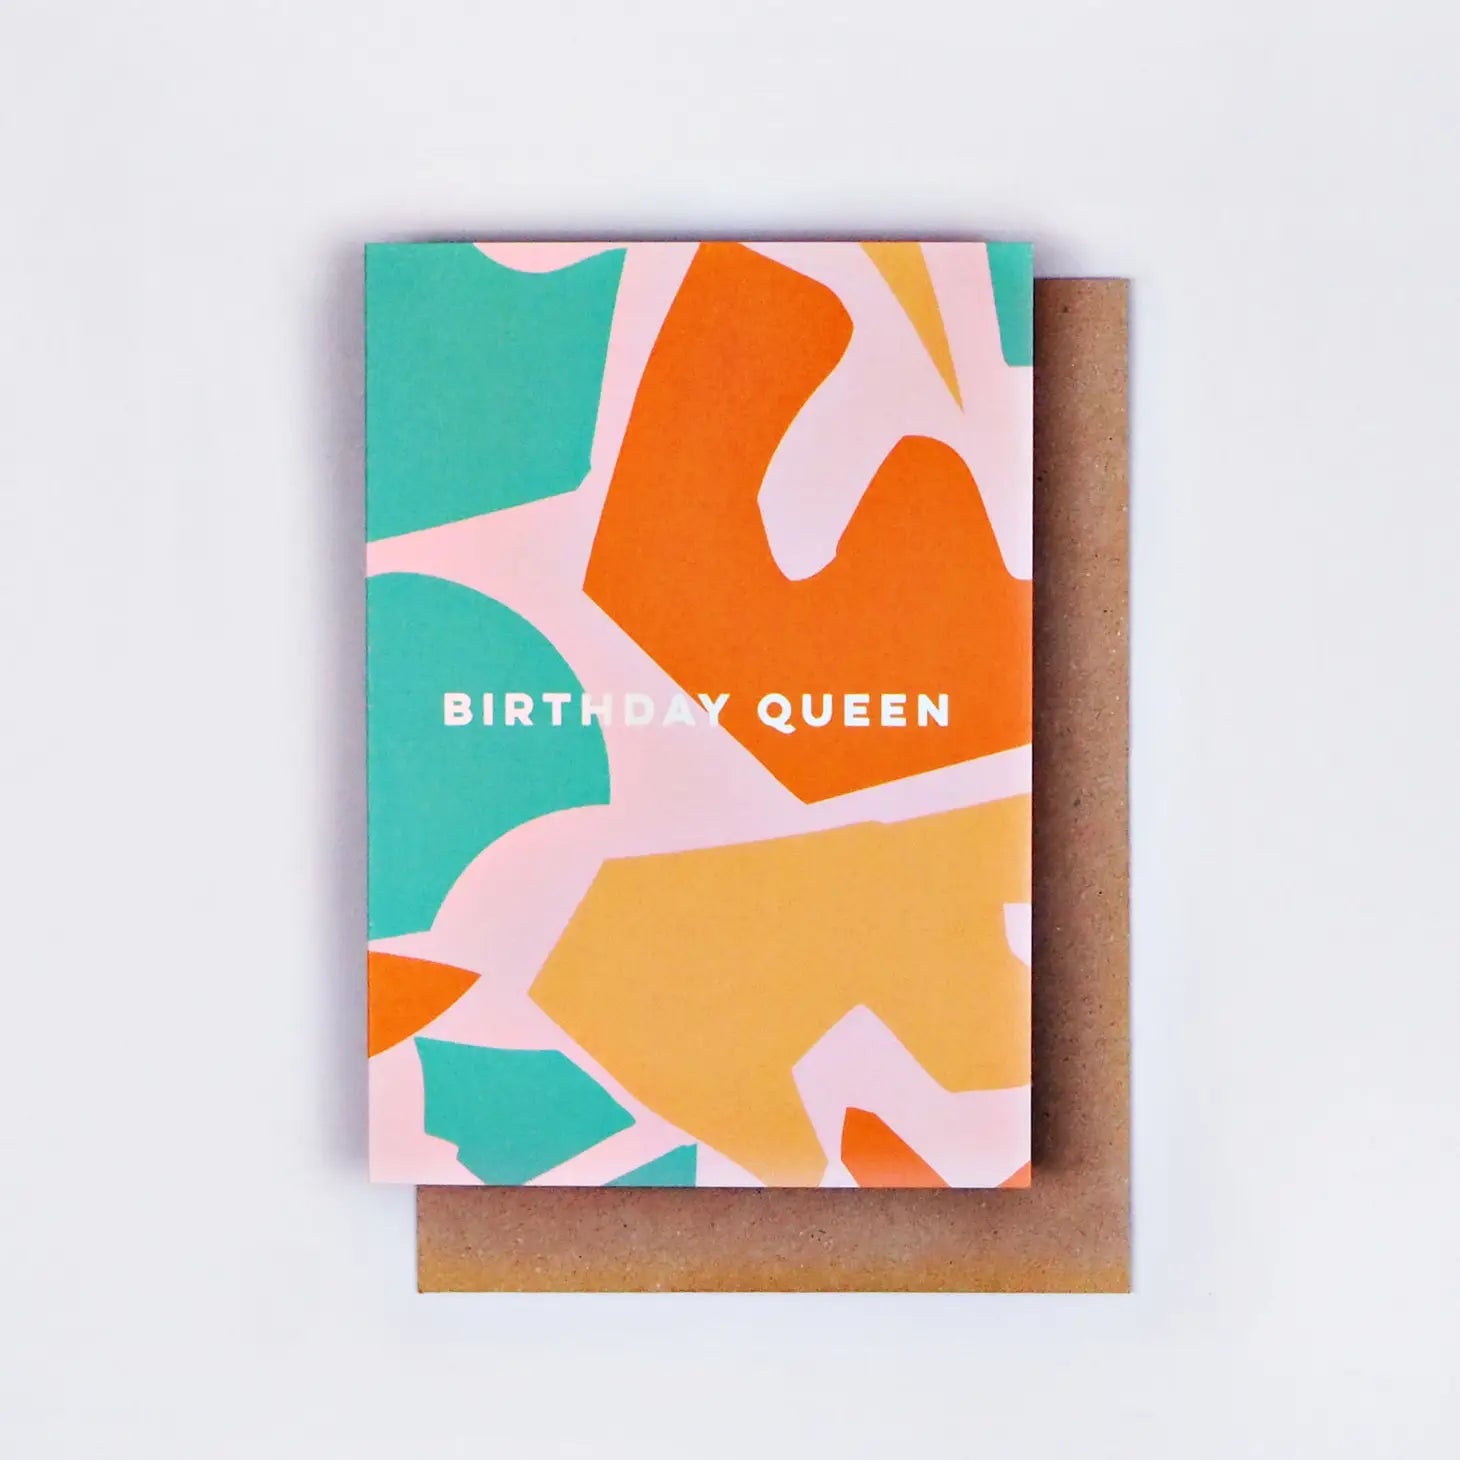 BIRTHDAY QUEEN | CARD BY THE COMPLETIST